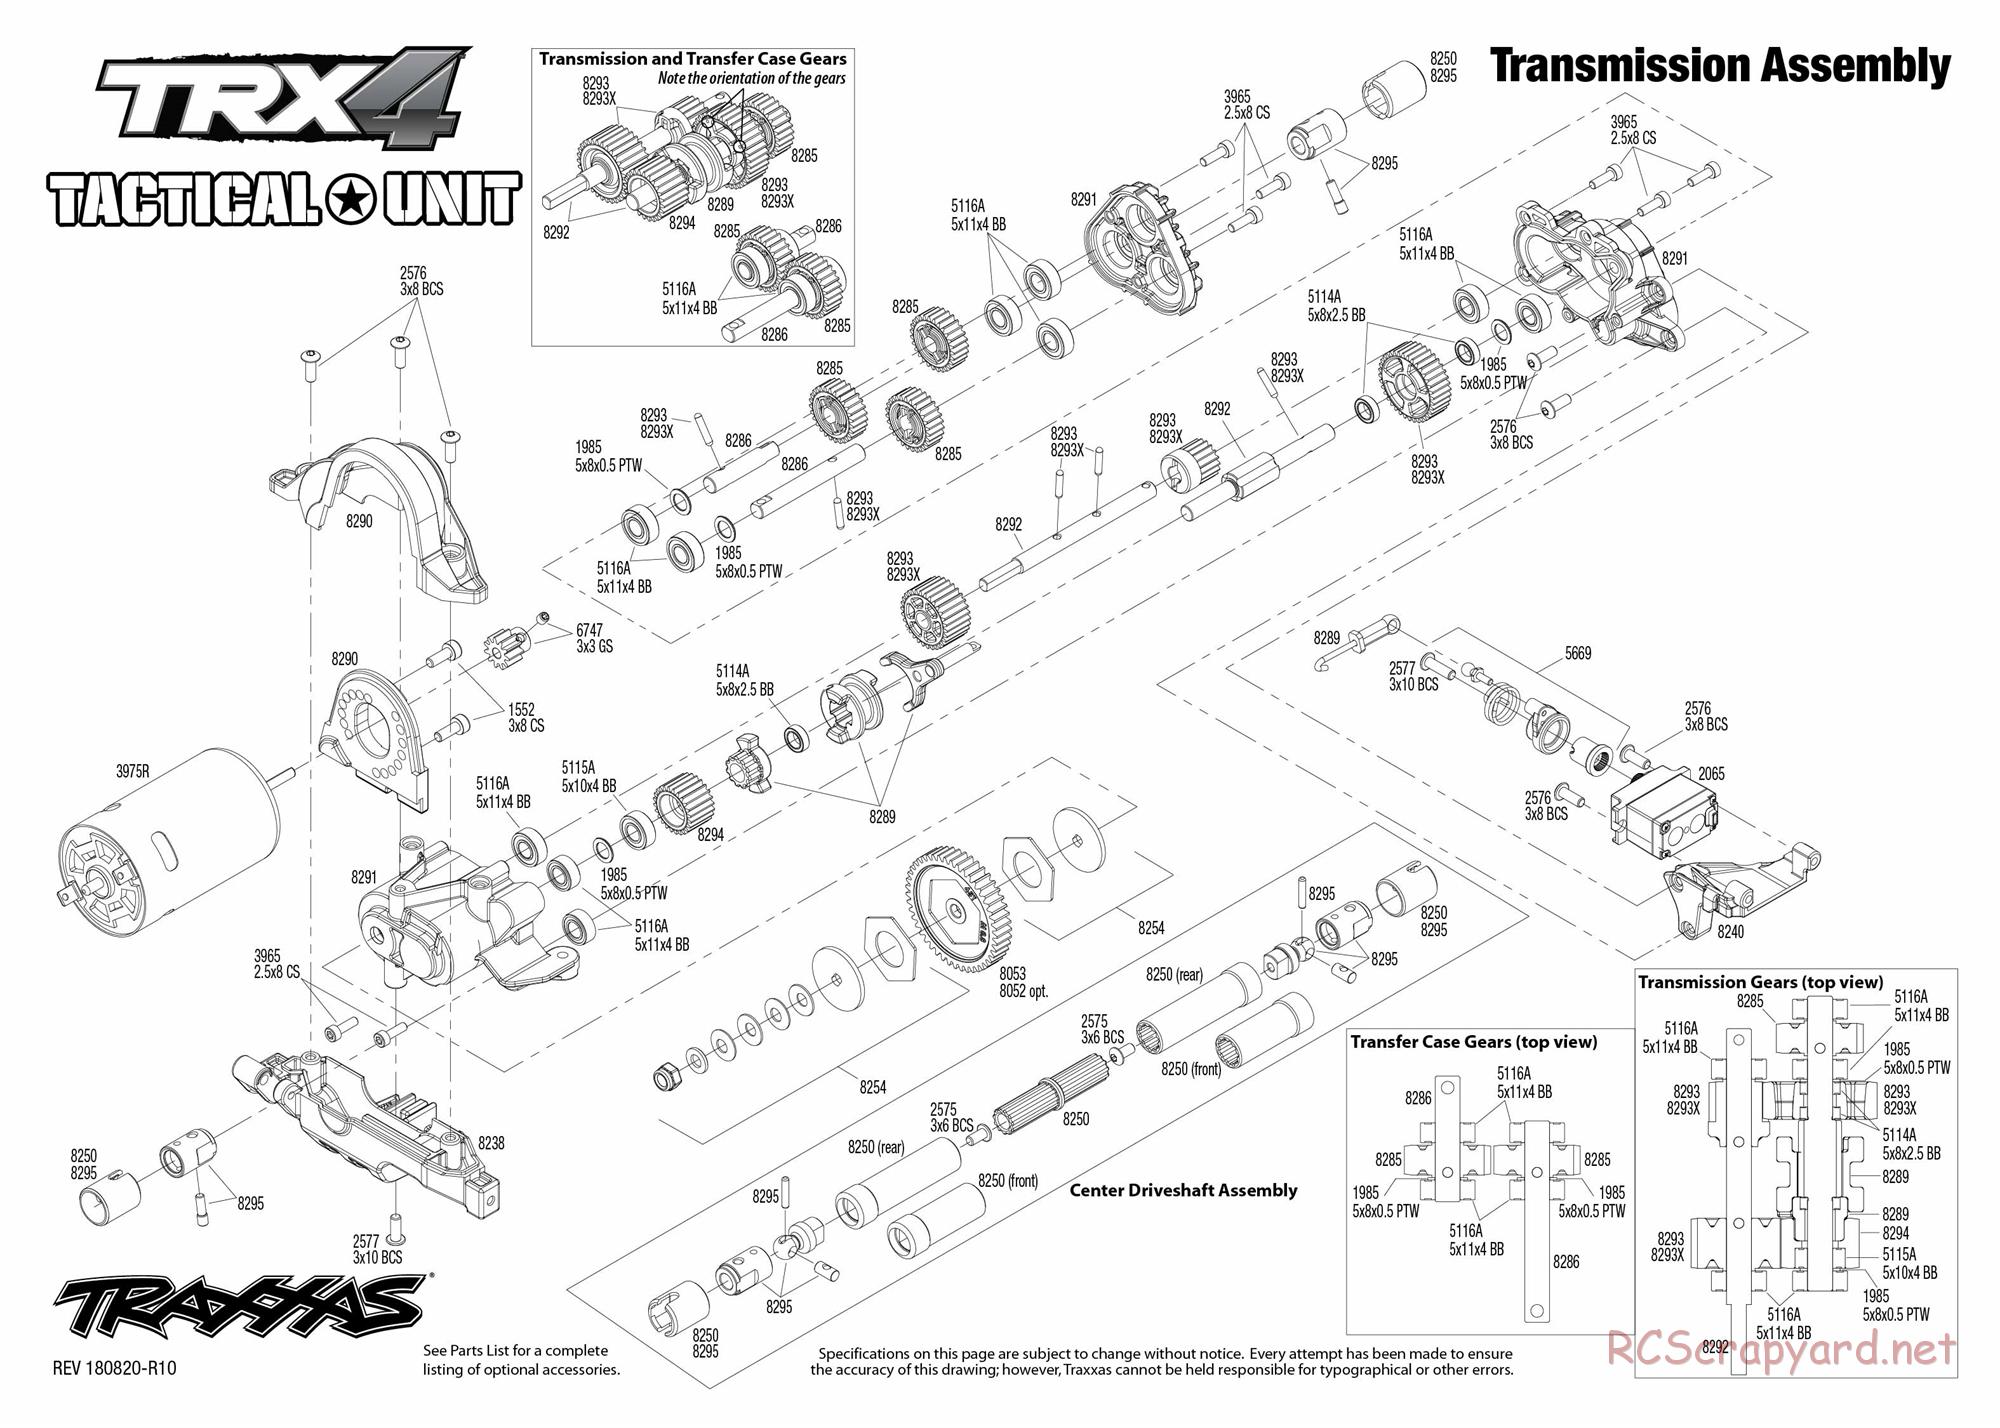 Traxxas - TRX-4 Tactical Unit (2018) - Exploded Views - Page 6